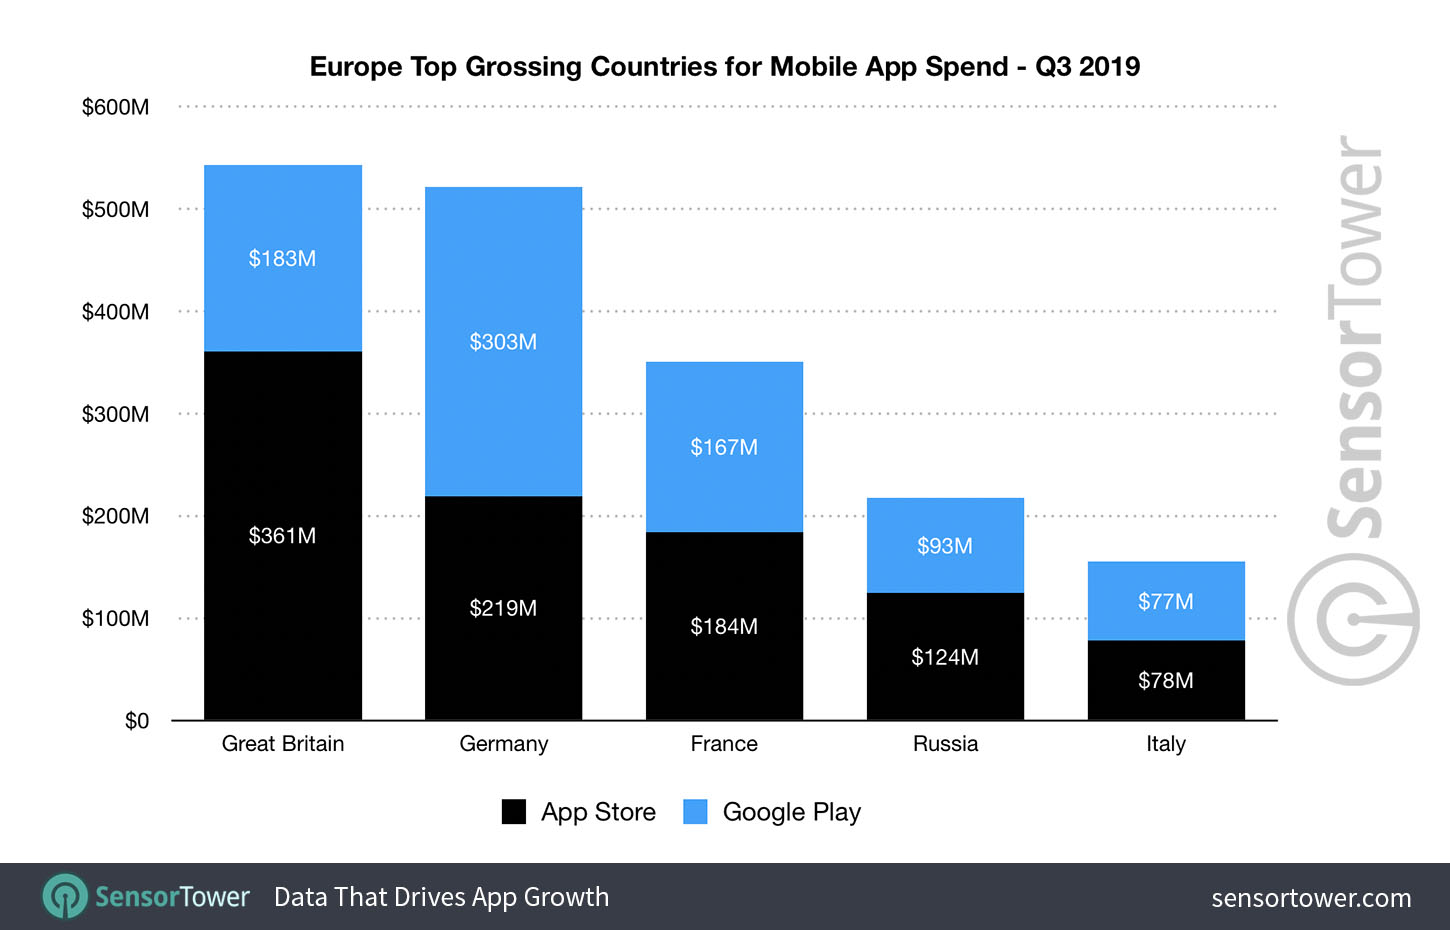 Q3 2019 Top Grossing Countries for Europe